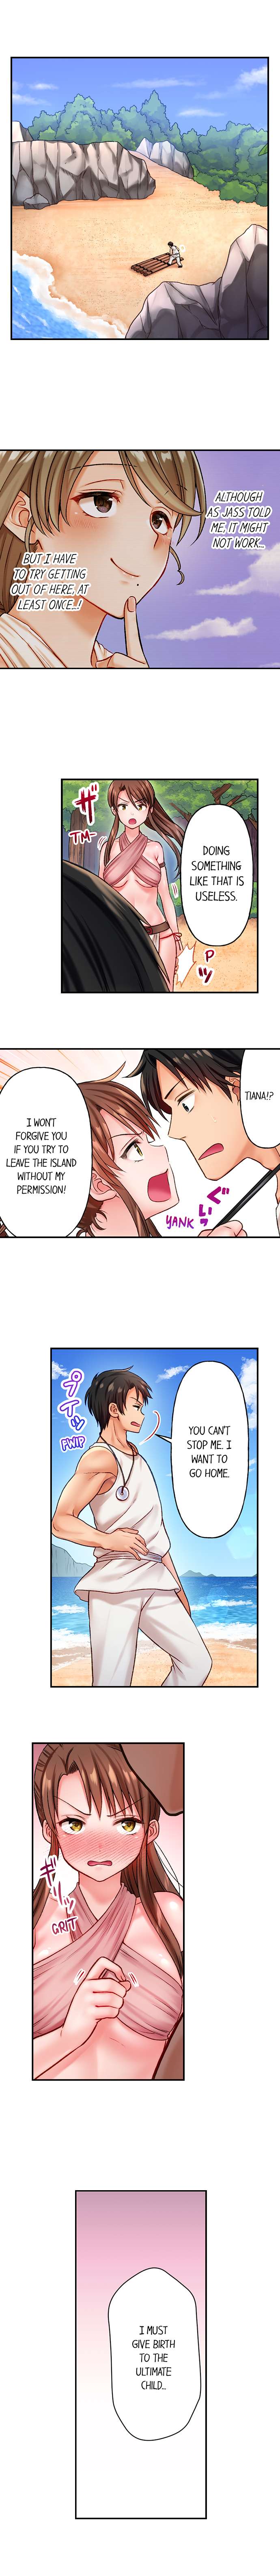 Girls' Island: Only I Can Fuck Them All! - Chapter 8 Page 2